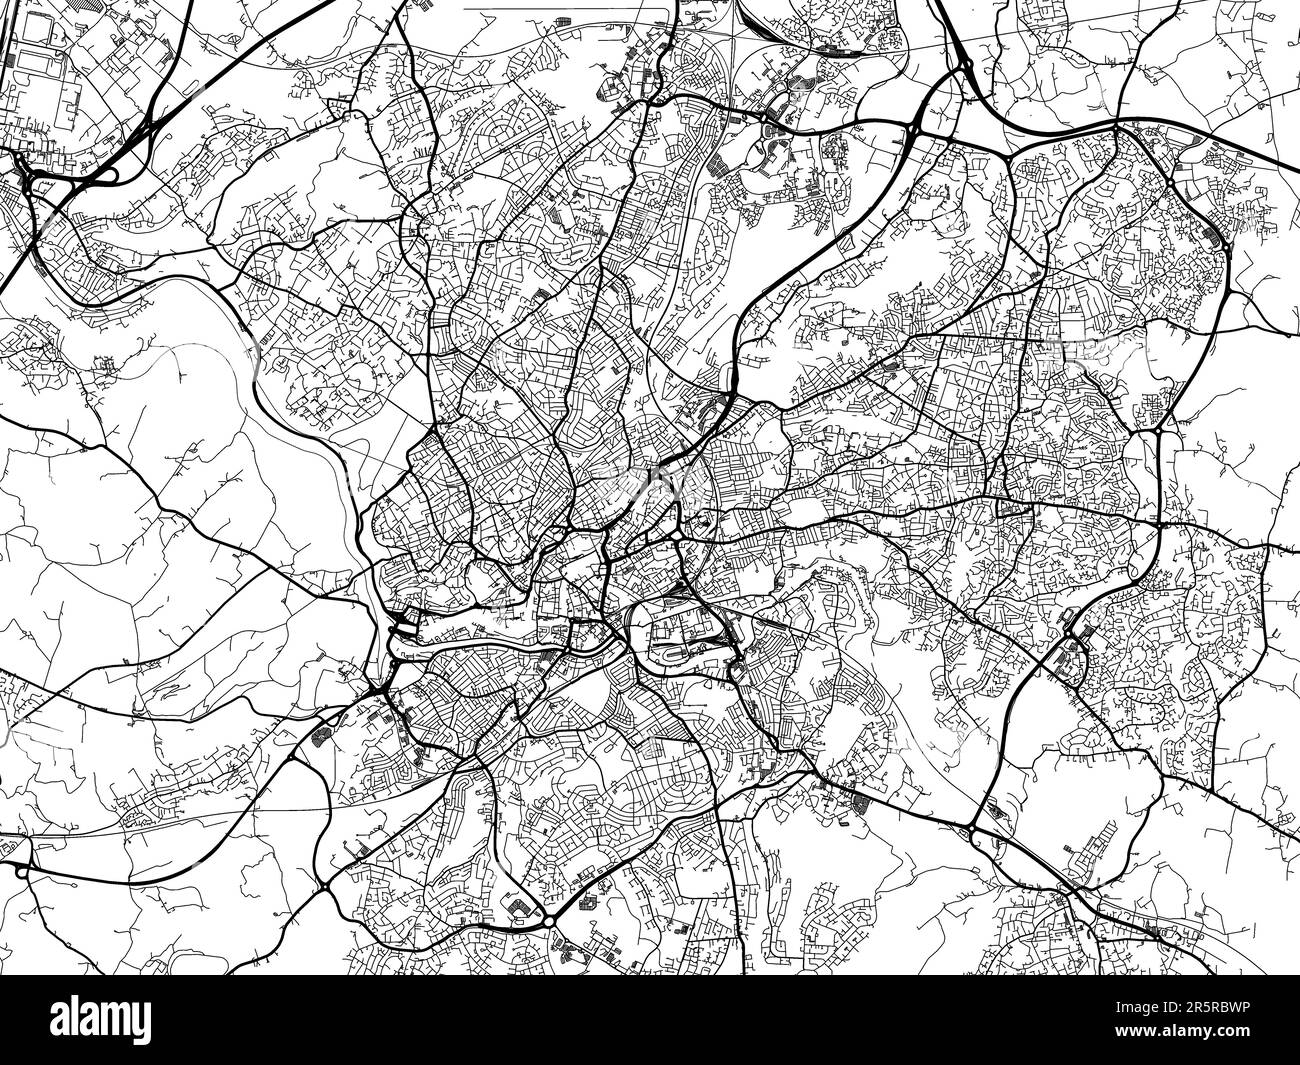 Road map of the city of Bristol in the United Kingdom on a white ...